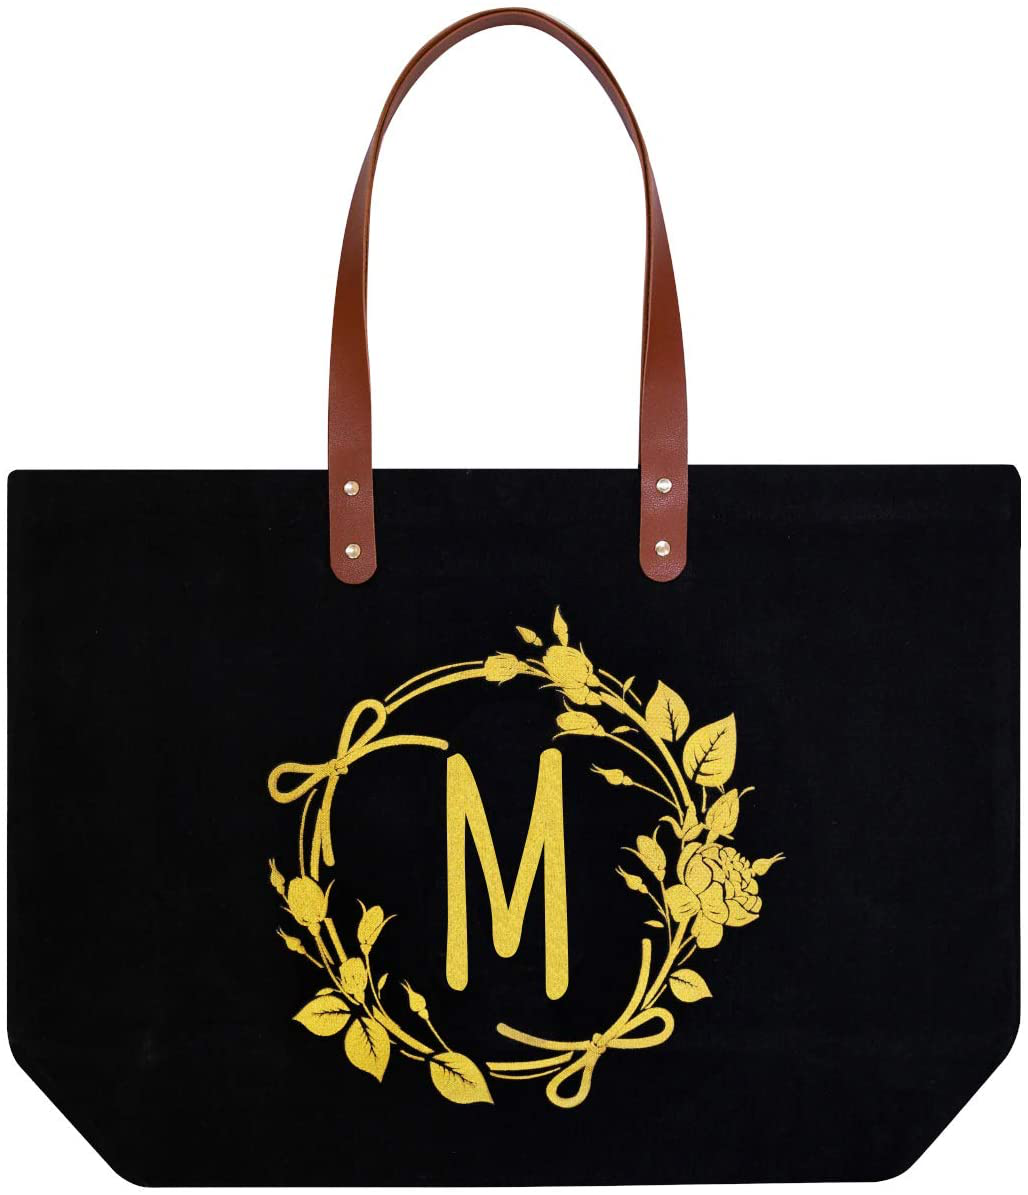 ElegantPark Monogrammed Gifts for Women Personalized Tote Bags Monogram A Initial Bag Totes for Wedding Bride Bridesmaid Gifts Birthday Gifts Teacher Gifts Bag with Pocket Black Canvas